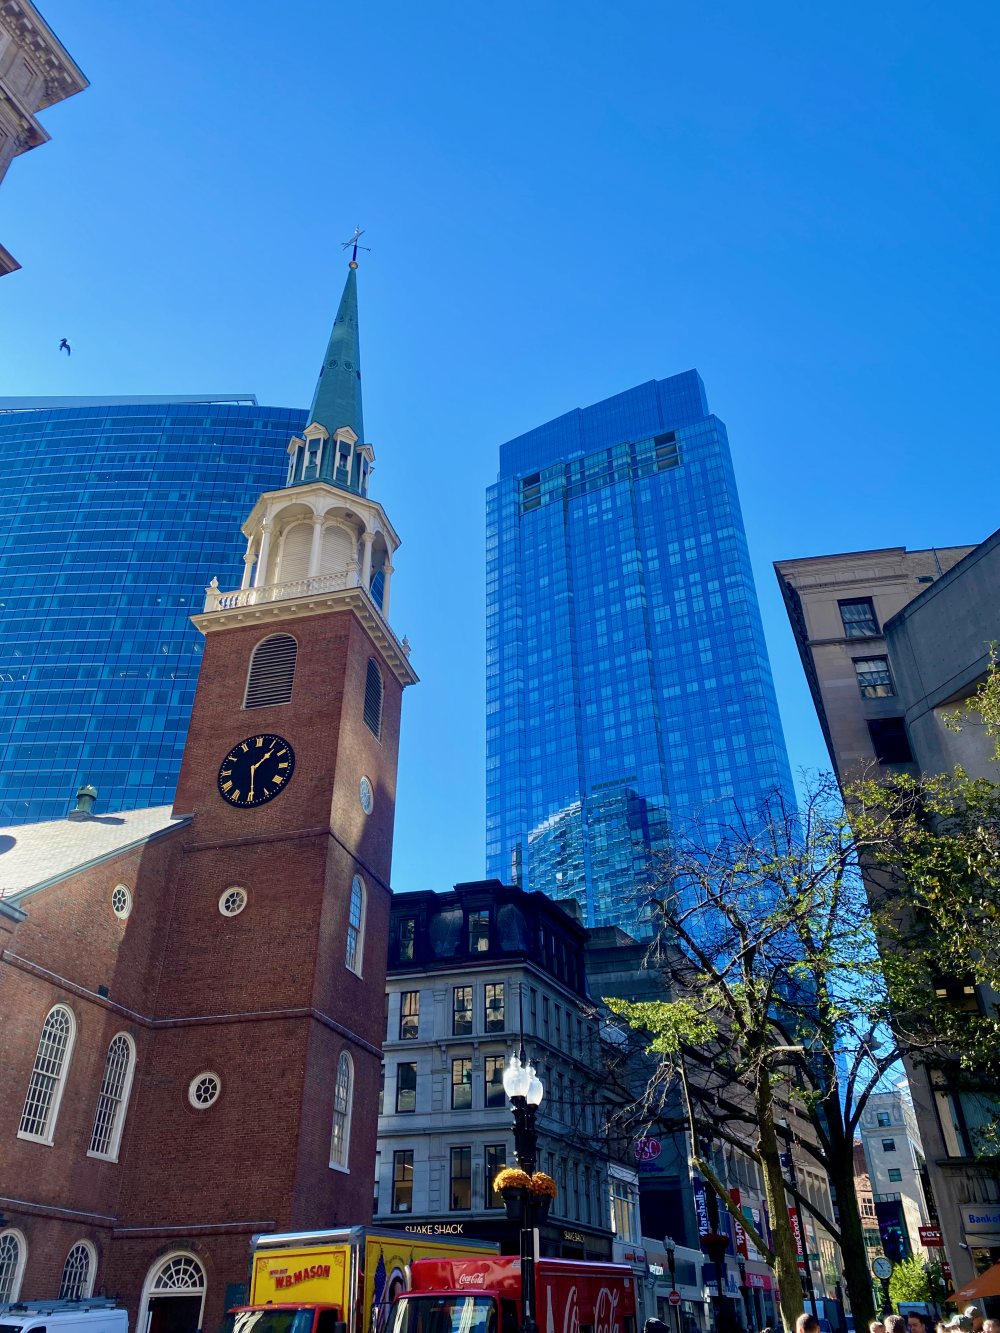 Old and new buildings in Boston